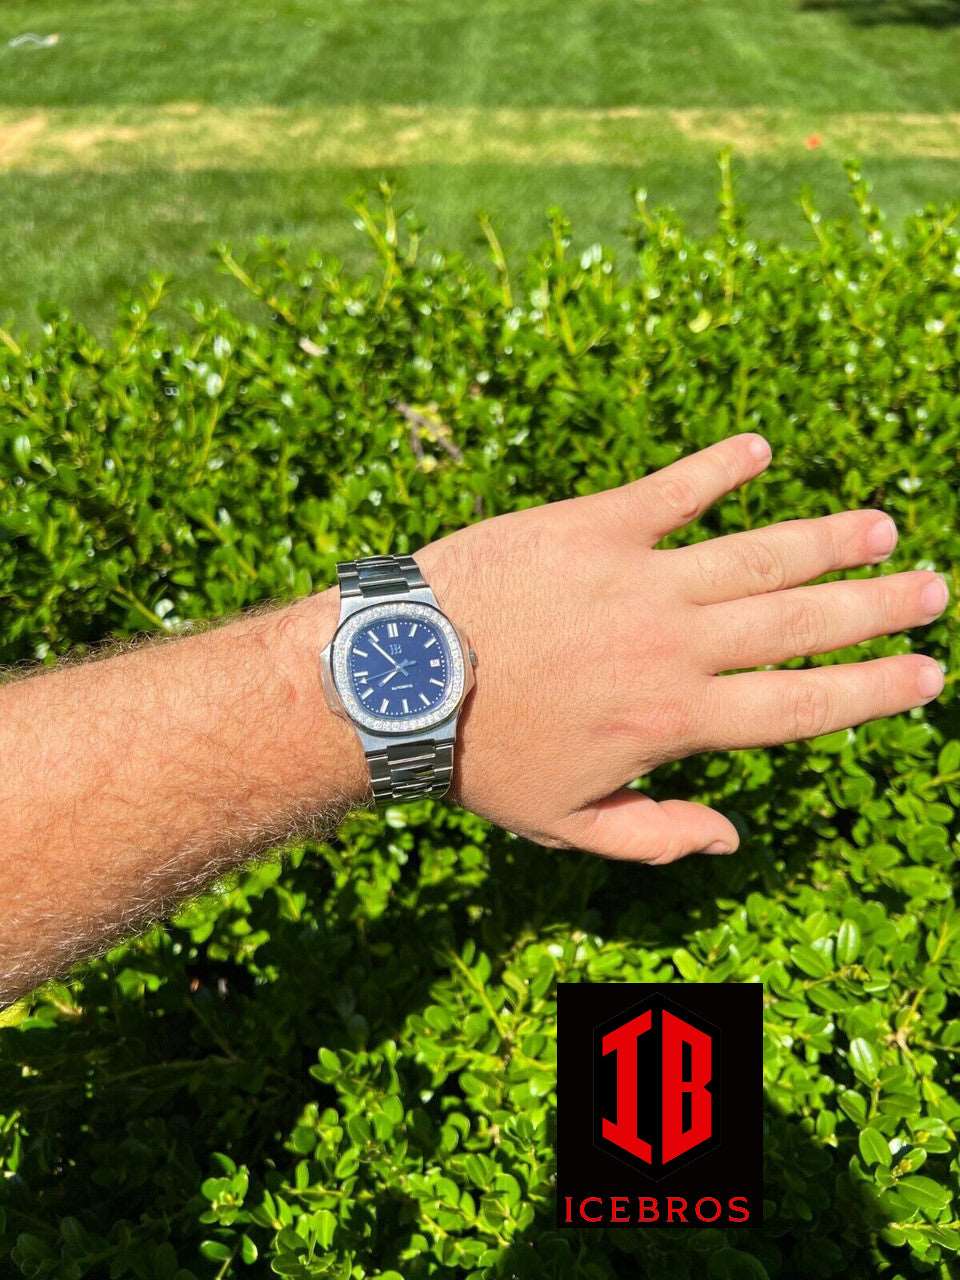 (18) Mens Real Stainless Steel Iced 2cts Moissanite Watch Passes Diamond Test Blue Face